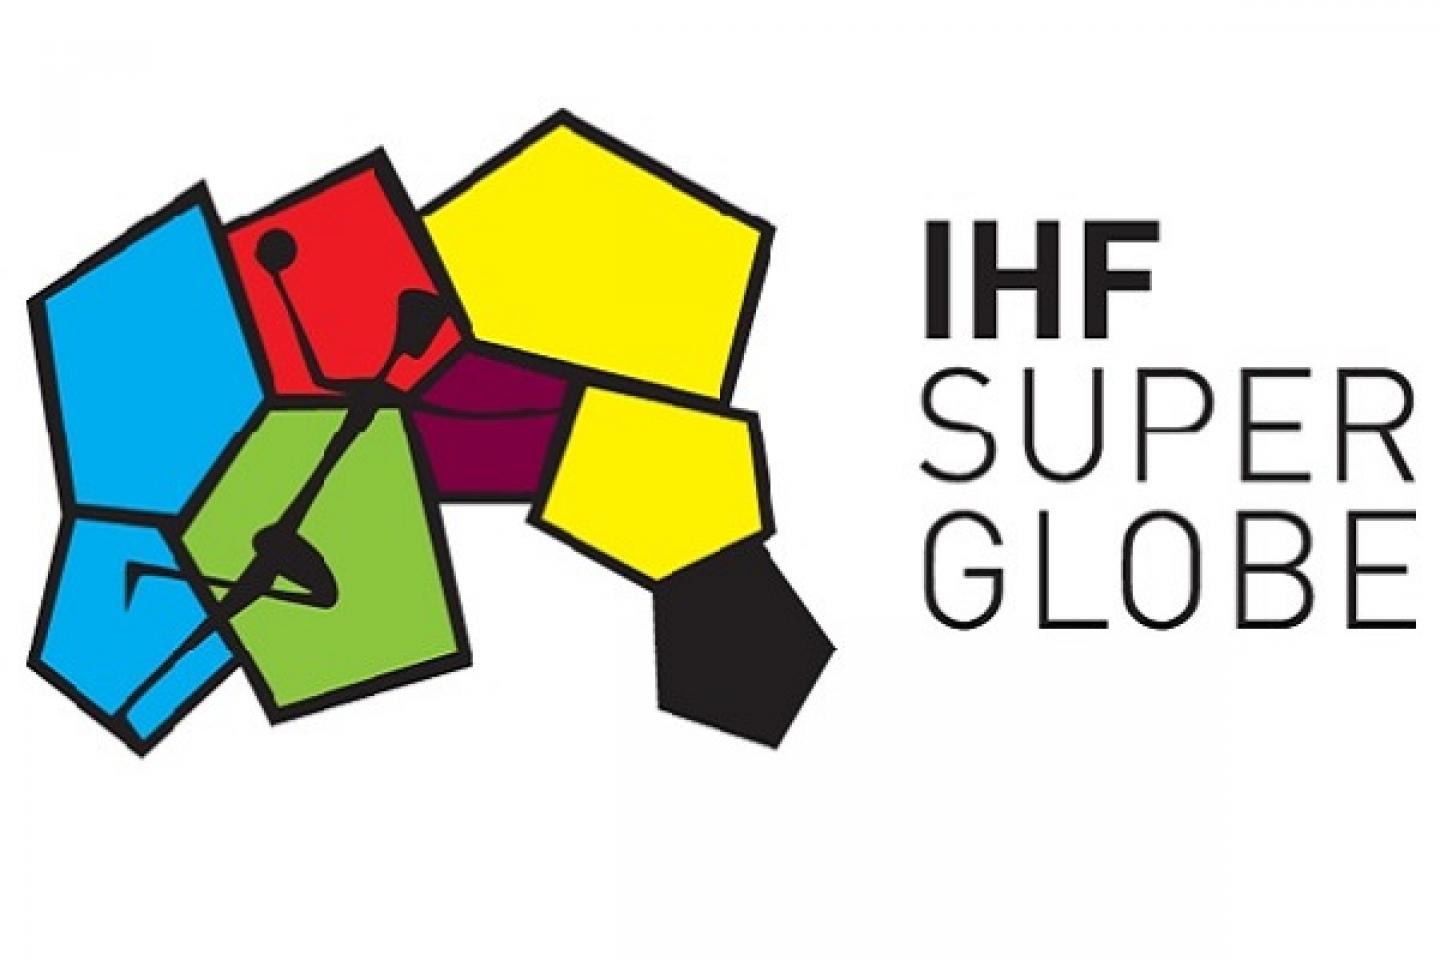 Accreditation for the 2012 IHF Super Globe in Doha